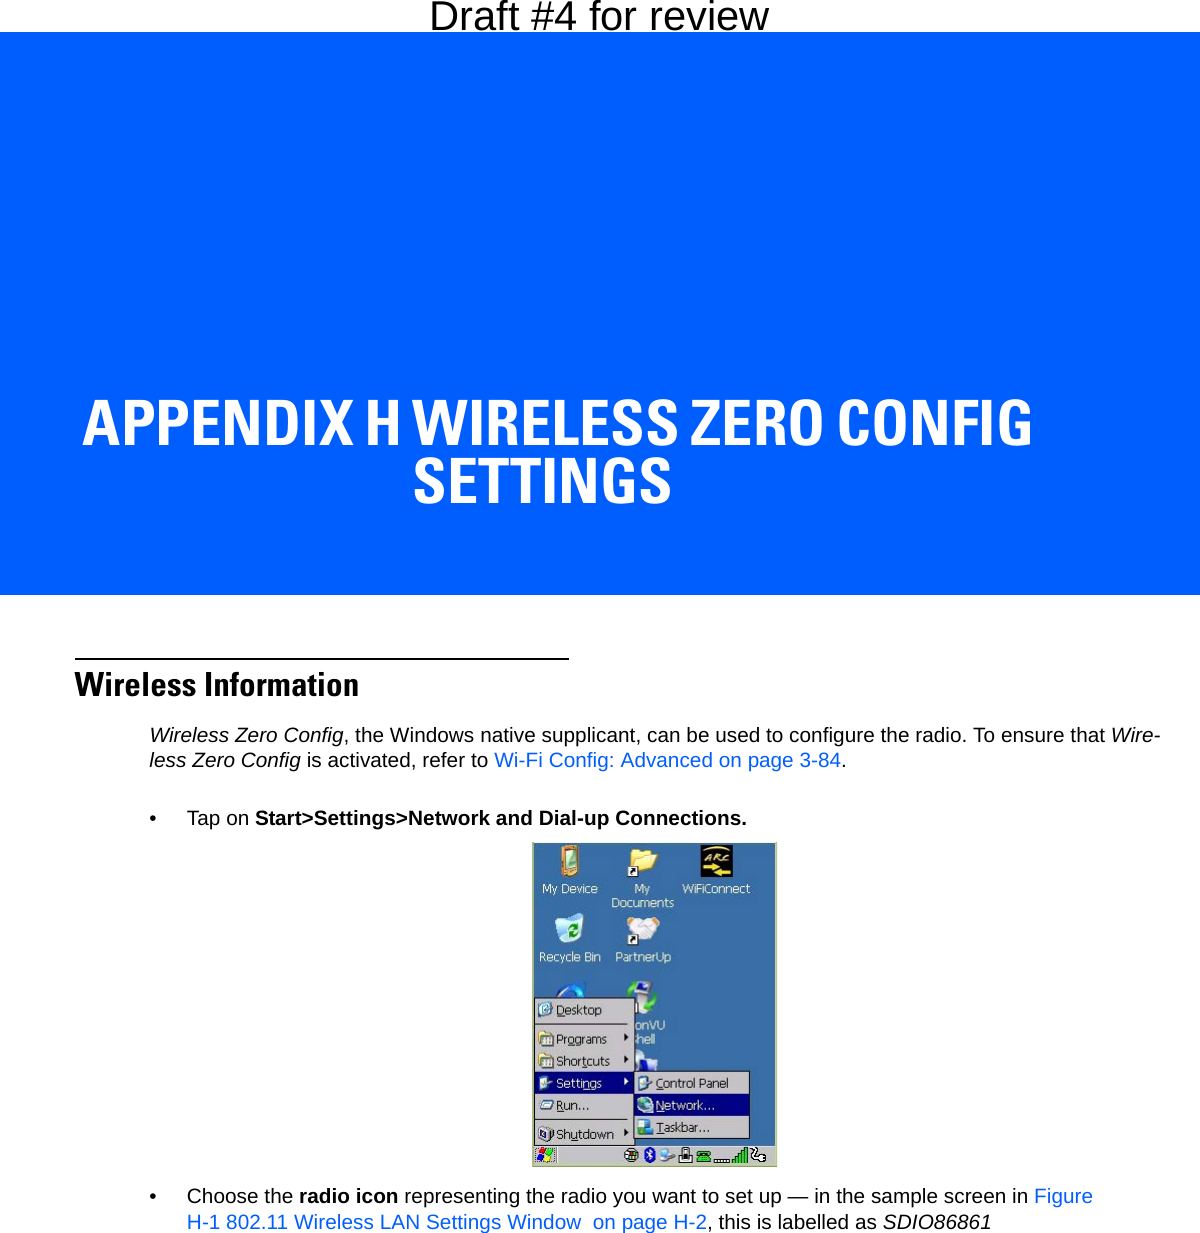 APPENDIX H WIRELESS ZERO CONFIG SETTINGSHWireless Zero Config SettingsWireless InformationWireless Zero Config, the Windows native supplicant, can be used to configure the radio. To ensure that Wire-less Zero Config is activated, refer to Wi-Fi Config: Advanced on page 3-84.•Tap on Start&gt;Settings&gt;Network and Dial-up Connections. • Choose the radio icon representing the radio you want to set up — in the sample screen in Figure H-1 802.11 Wireless LAN Settings Window  on page H-2, this is labelled as SDIO86861Draft #4 for review